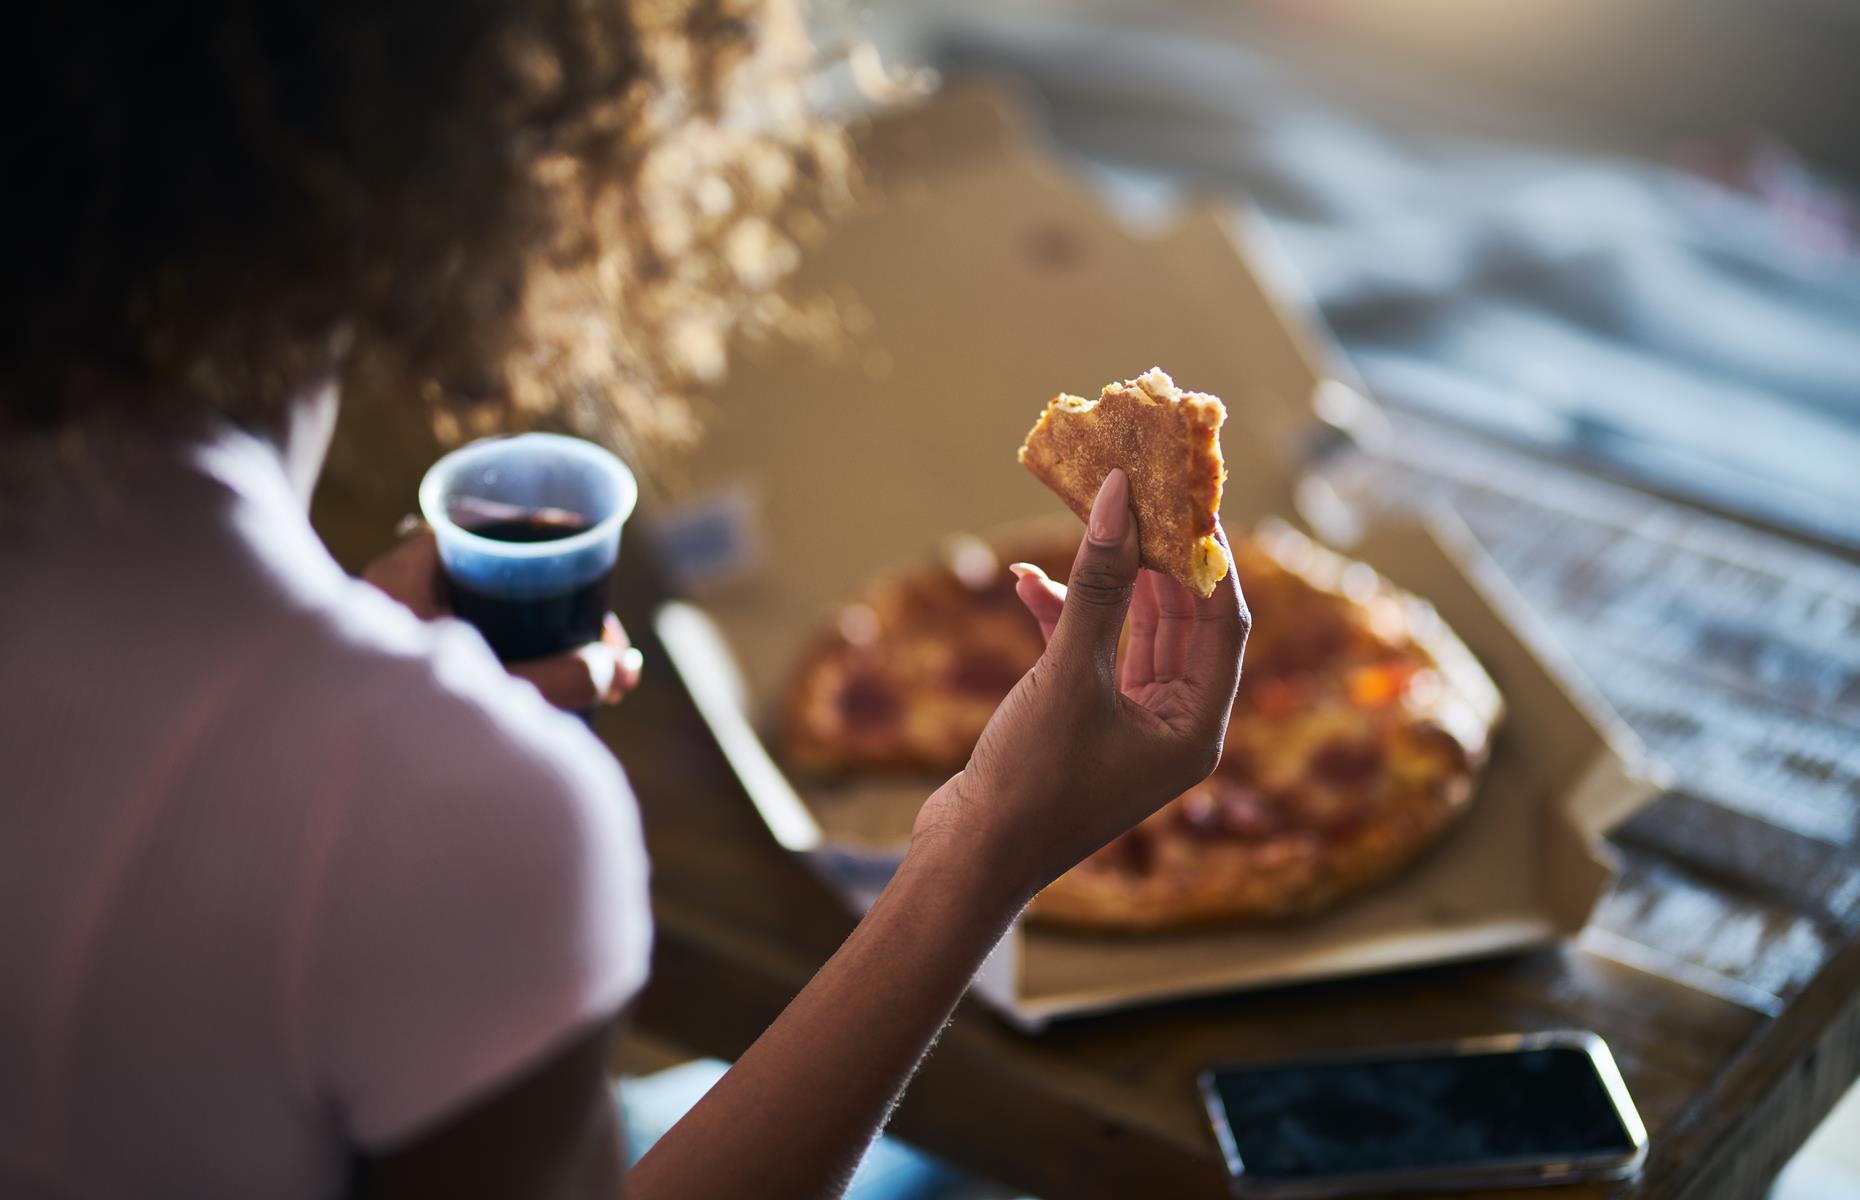 <p>Chewing well can mean you eat less, helping to keep your weight in check. <a href="https://www.ncbi.nlm.nih.gov/pubmed/24215801">Researchers found</a> people ate about 10% fewer pizza rolls, corresponding to 70 fewer calories, when they increased their number of bites by half. When they doubled their chewing, they ate 15% less food and 112 fewer calories. </p>  <p><strong><a href="https://www.lovefood.com/galleries/82353/27-low-carb-cheats-to-get-your-diet-back-on-track?page=1">Looking to cut out carbs? Here are 27 brilliant ideas</a></strong></p>